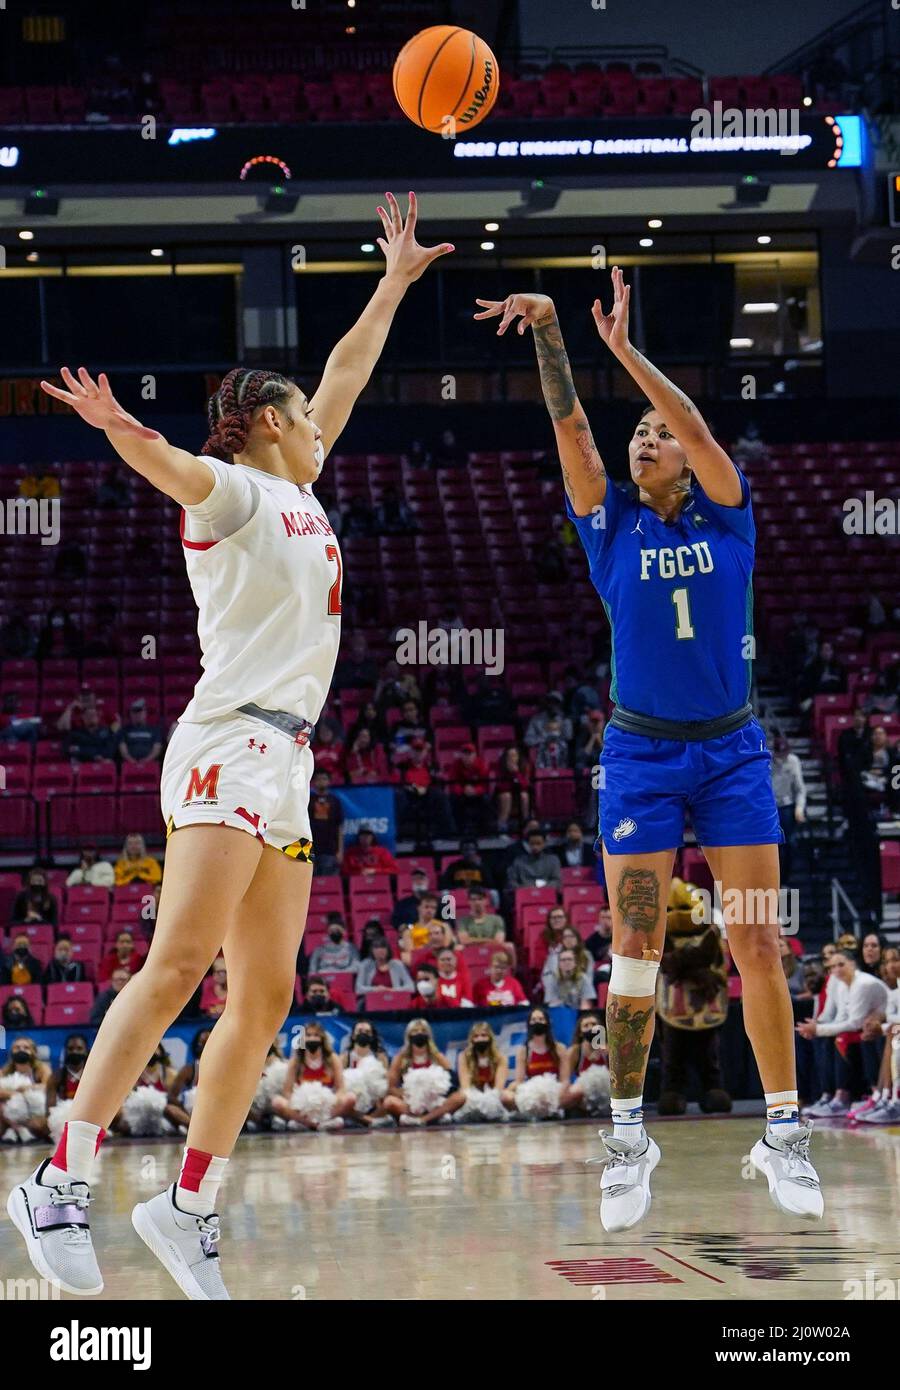 COLLEGE PARK, Maryland, USA - 20 MARCH 2022: Florida Gulf Coast Eagles guard Kierstan Bell (1) lobs a shot over Maryland Terrapins forward Mimi Collins (2) during a NCAA women's basketball tournament second round game between the Maryland Terrapins and the Florida Gulf Coast Eagles, on March 20, 2022, at Xfinity Center, in College Park, Maryland. (Photo by Tony Quinn-Alamy Live News) Stock Photo